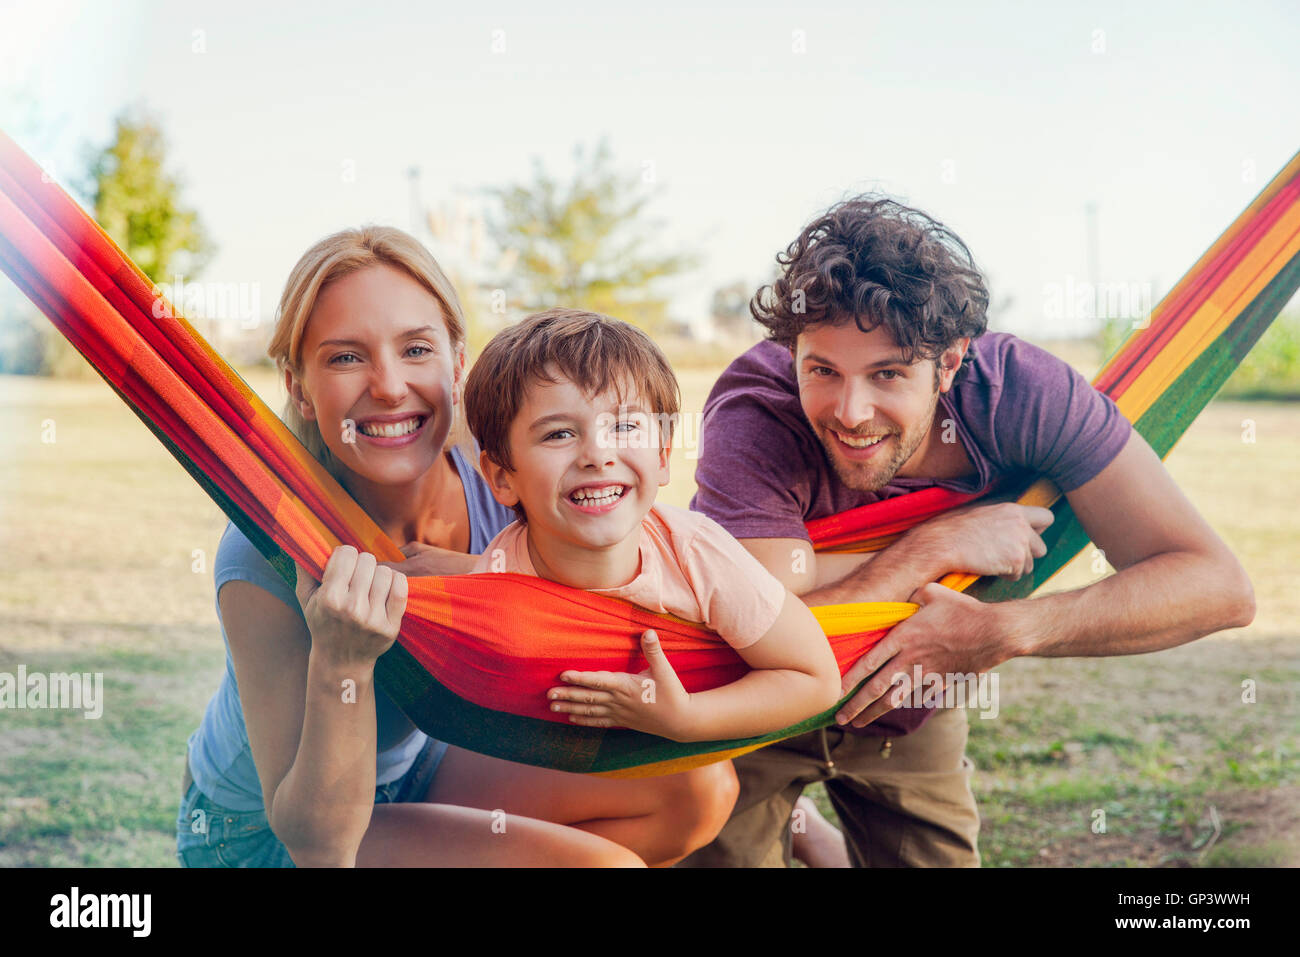 Family relaxing together outdoors, portrait Stock Photo